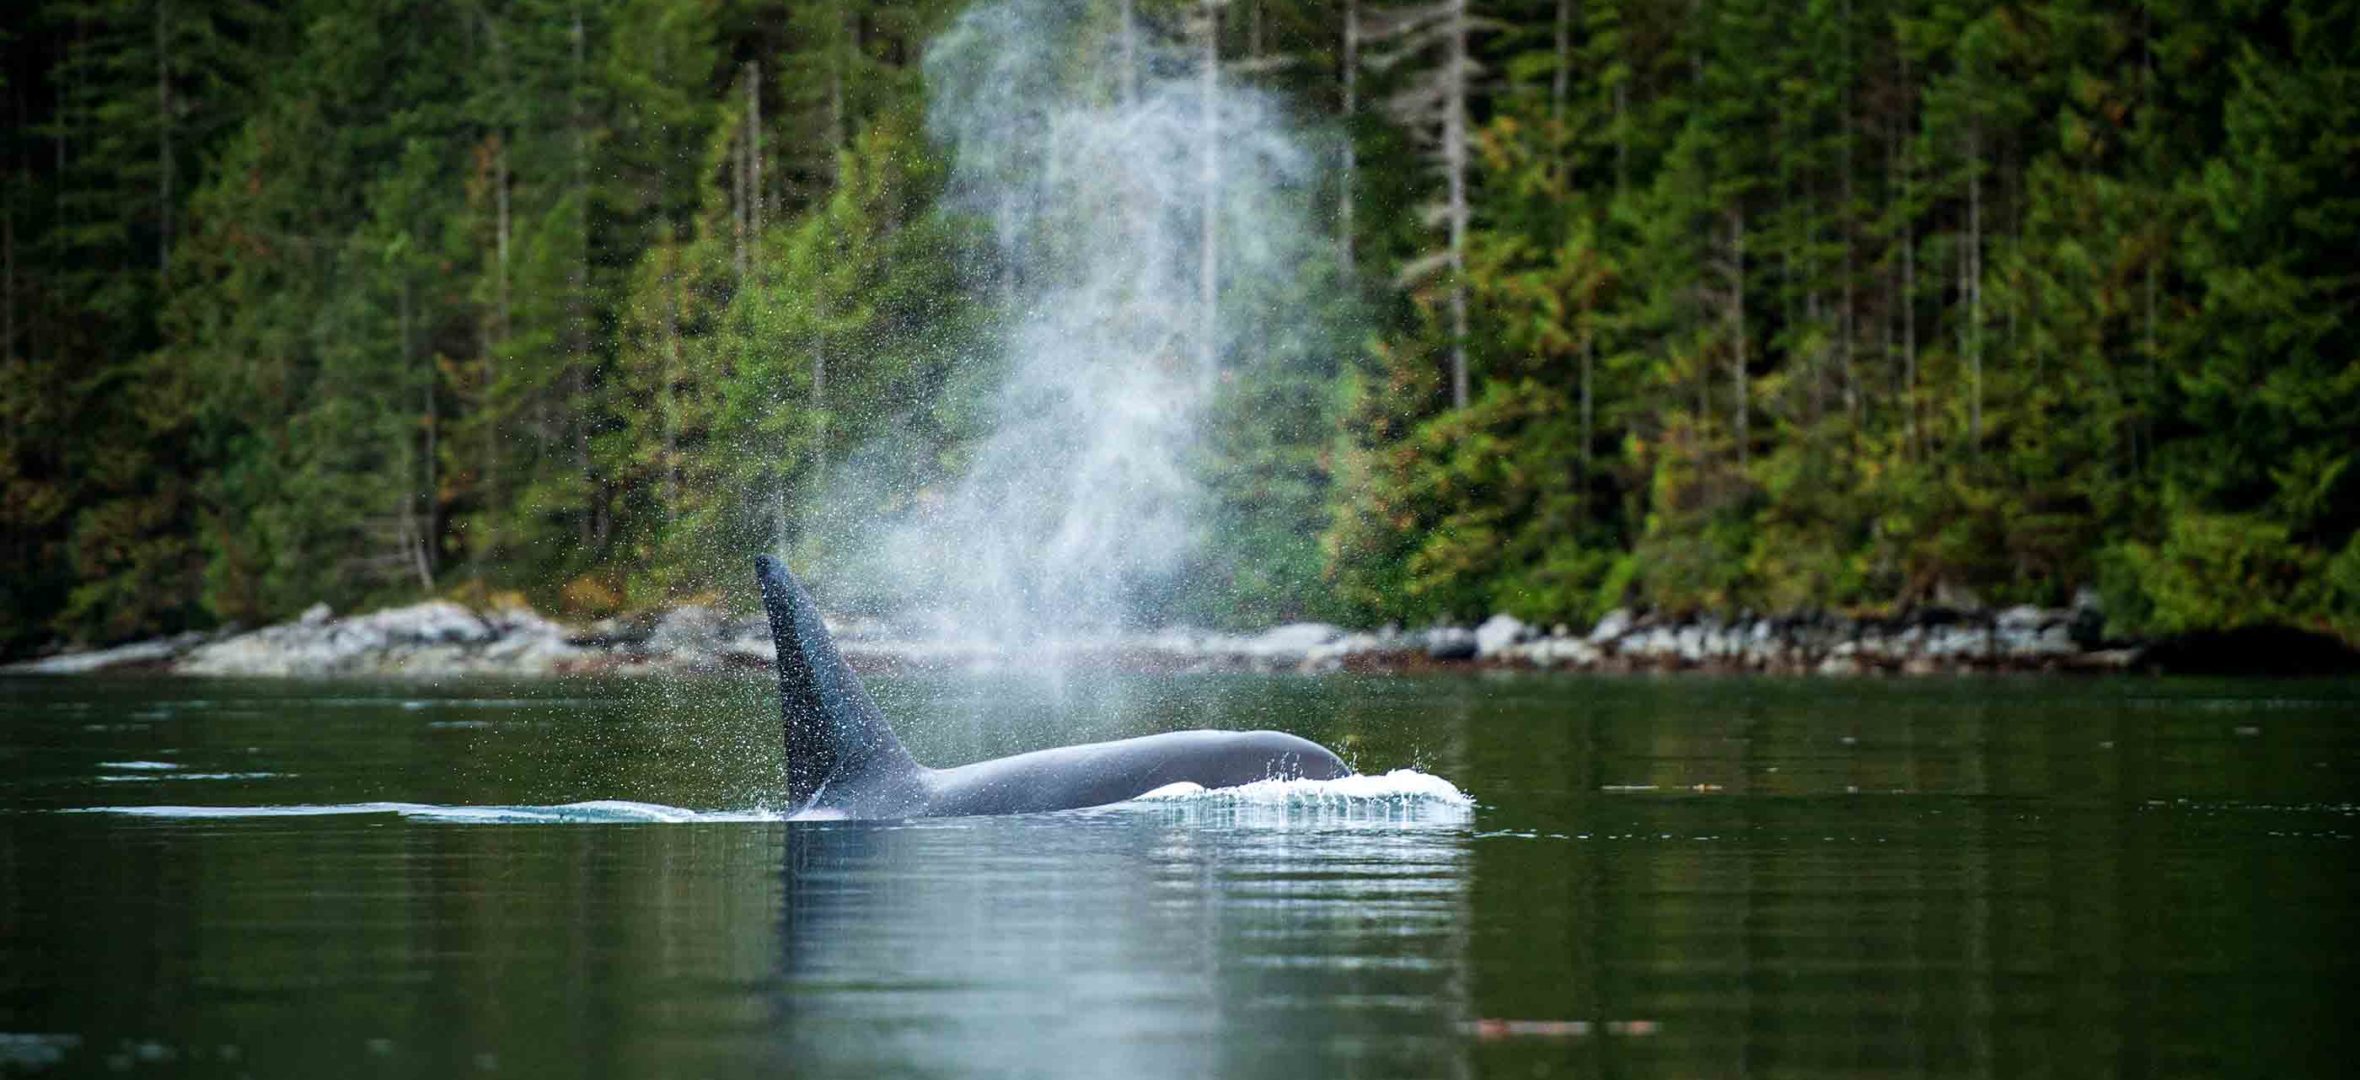 An orca in the water